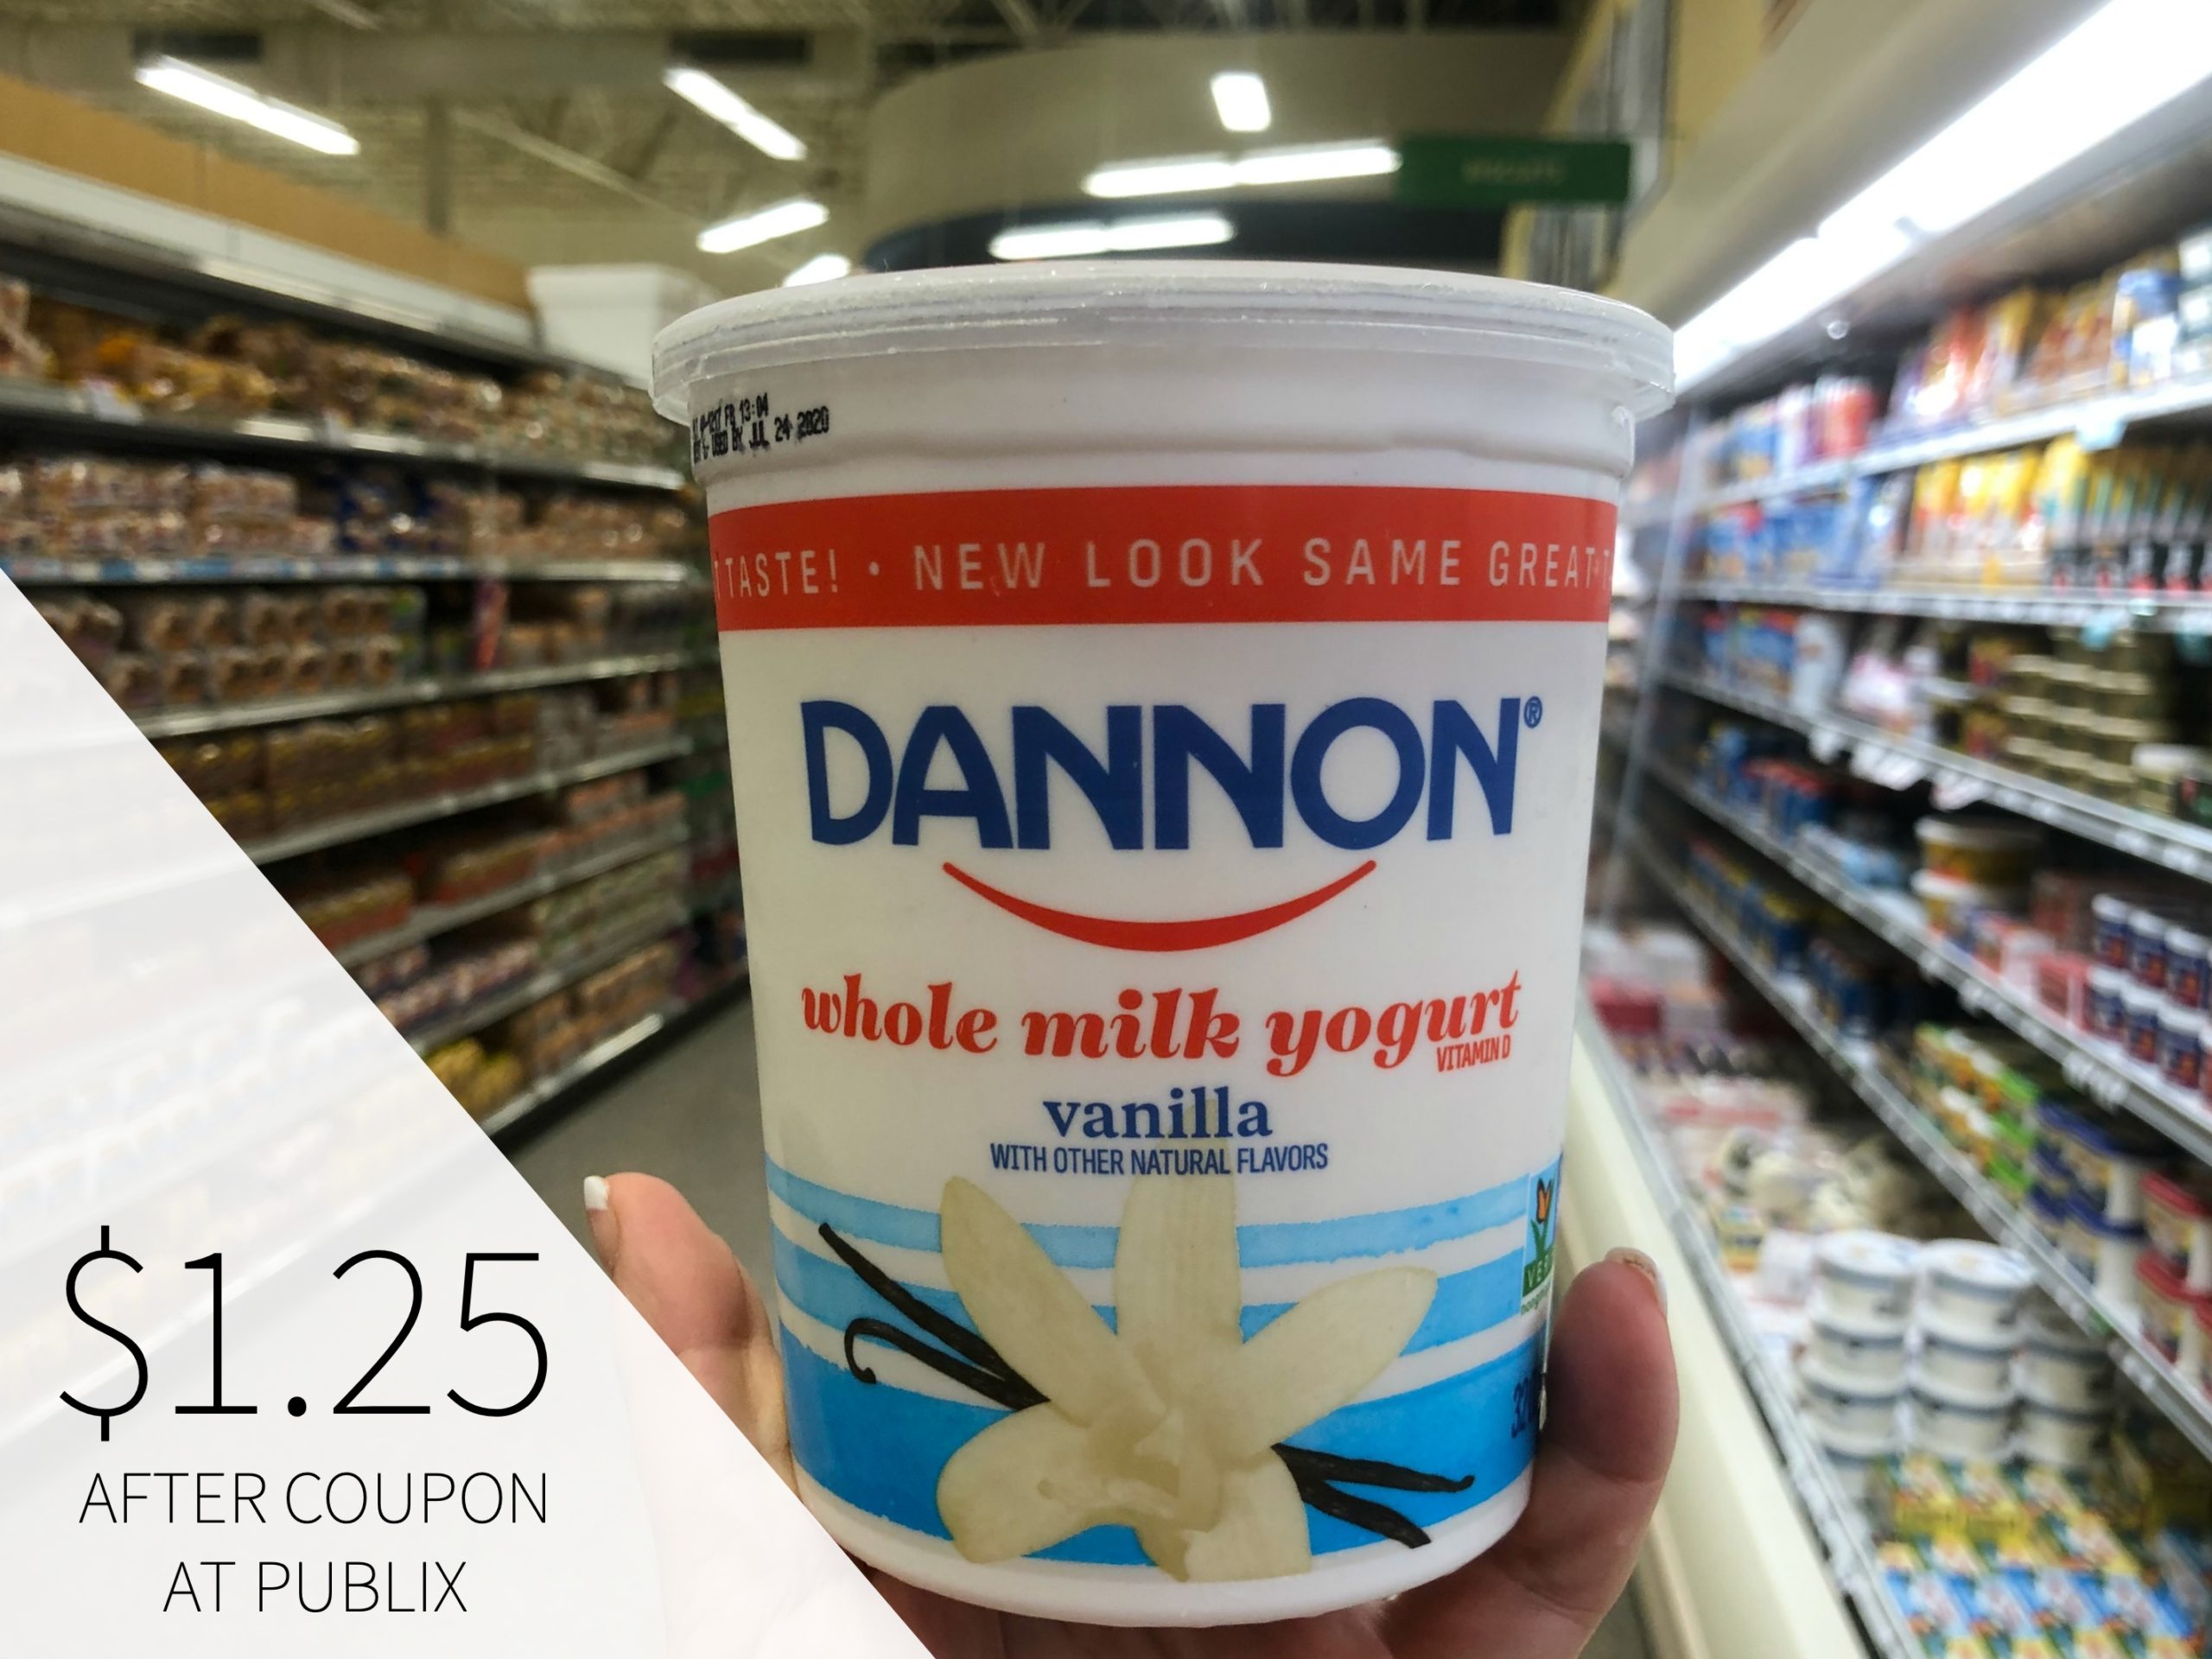 Save Big On Dannon Yogurt At Publix - New Look With The Same Great Taste! on I Heart Publix 1